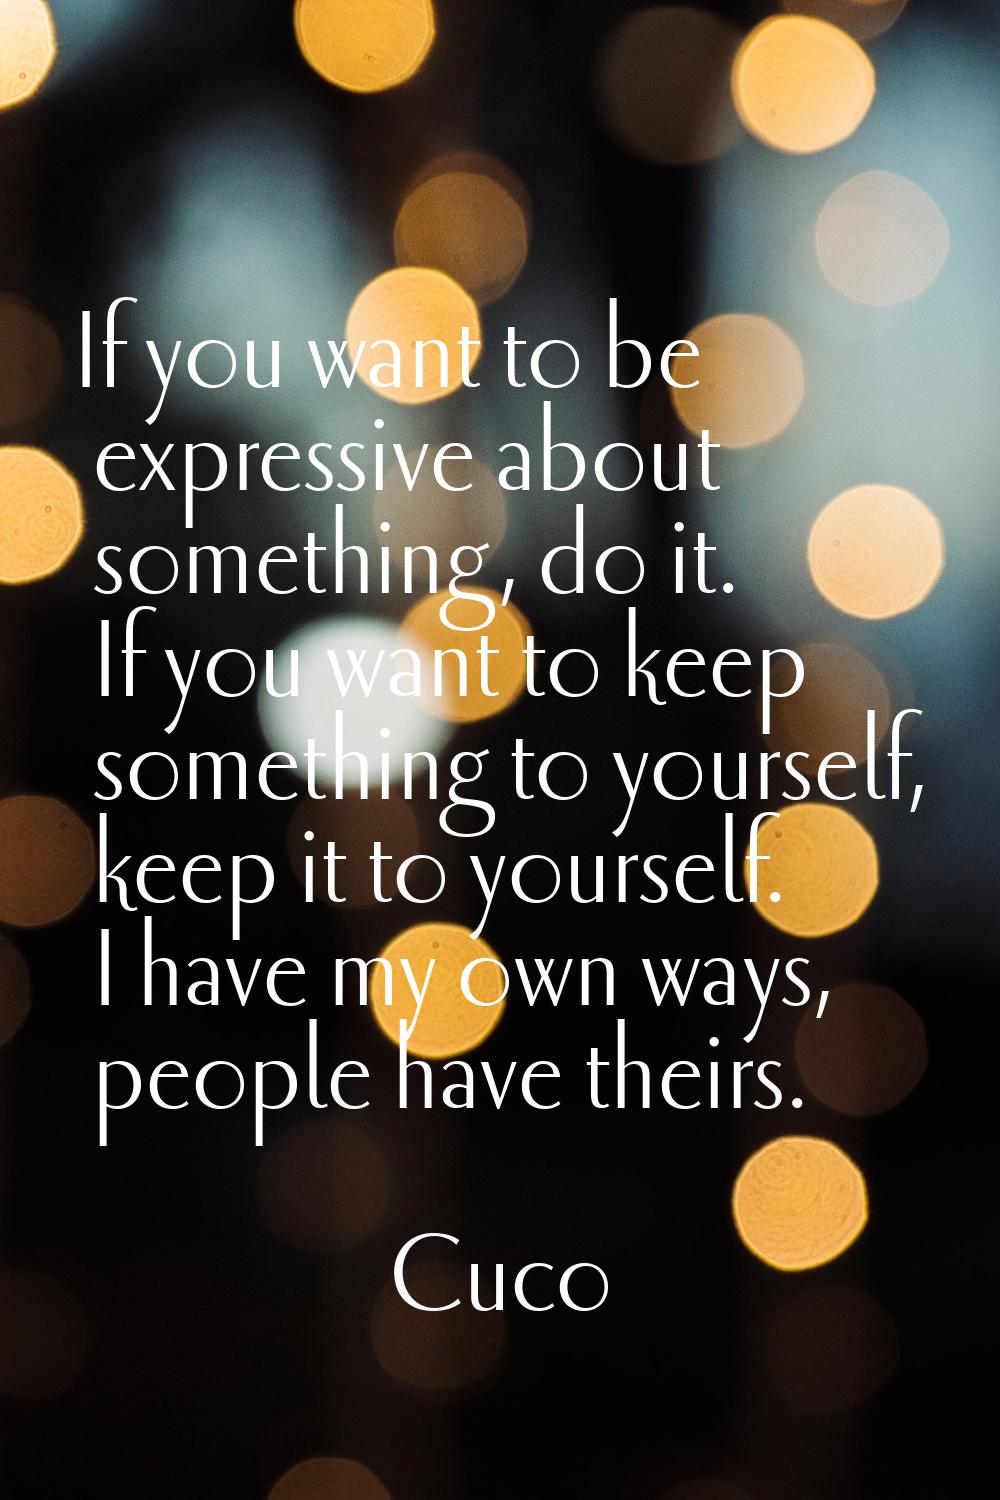 If you want to be expressive about something, do it. If you want to keep something to yourself, kee